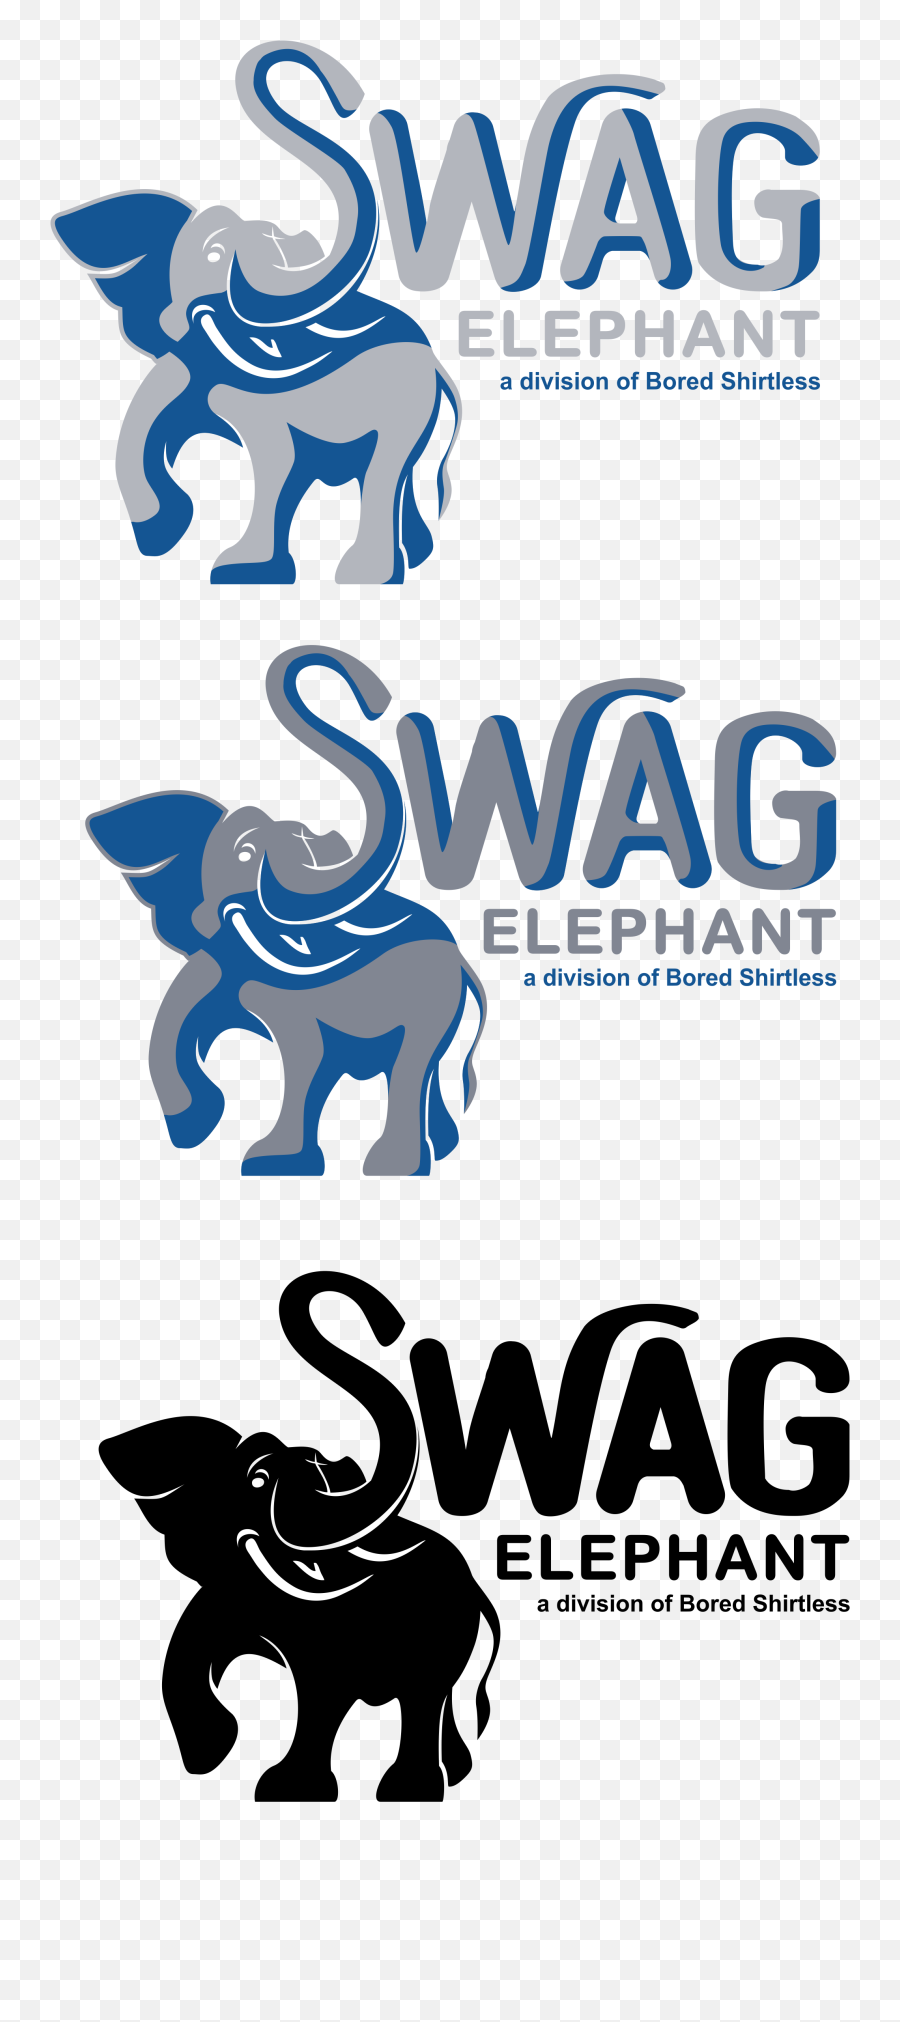 Elephant Logo Silhouette Transparent Background, Elephant Logo, Elephant  Drawing, Logo Drawing, Elephant Sketch PNG Image For Free Download